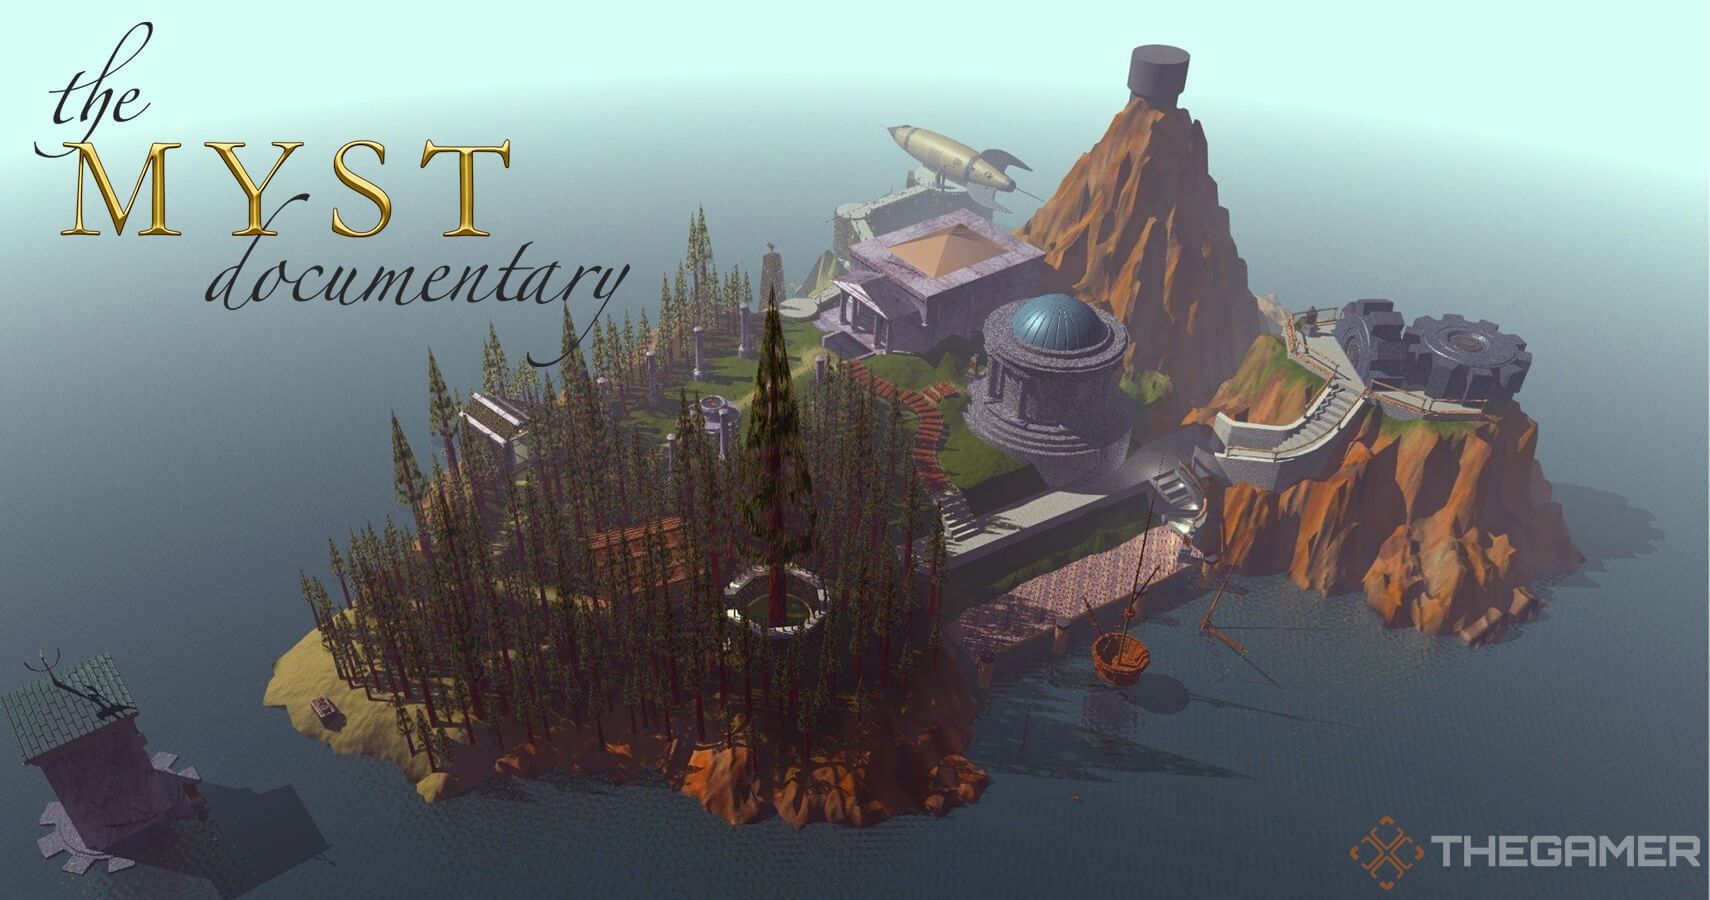 The Myst Documentary Is Hoping To Be An Exploration Of The Inspirations Behind The Hit Adventure Game